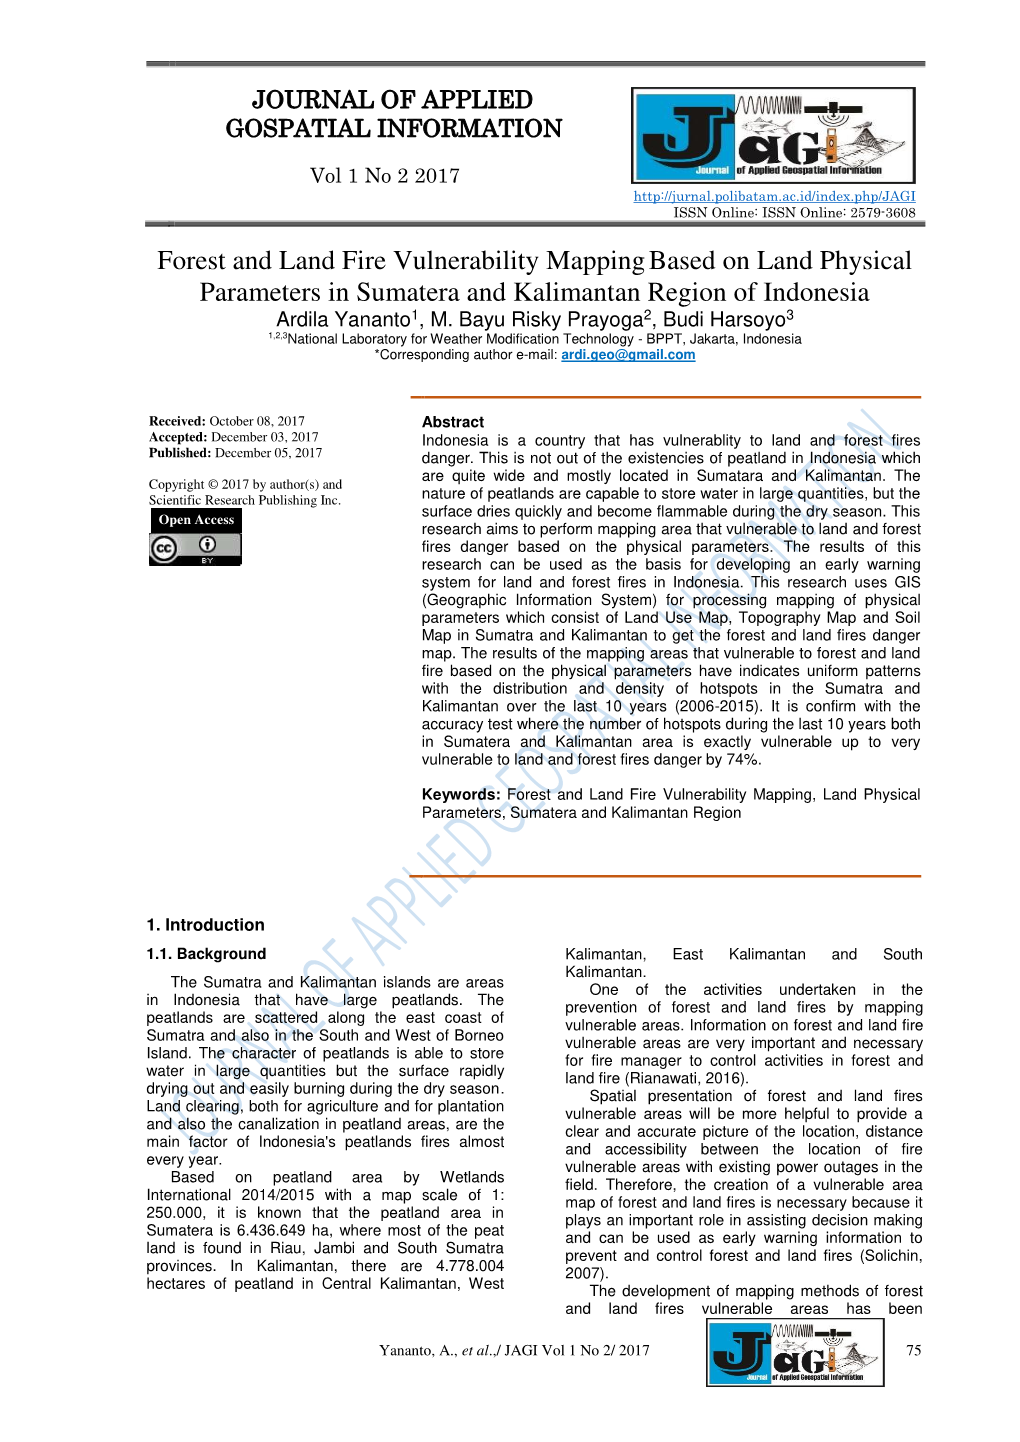 Forest and Land Fire Vulnerability Mappingbased on Land Physical Parameters in Sumatera and Kalimantan Region of Indonesia